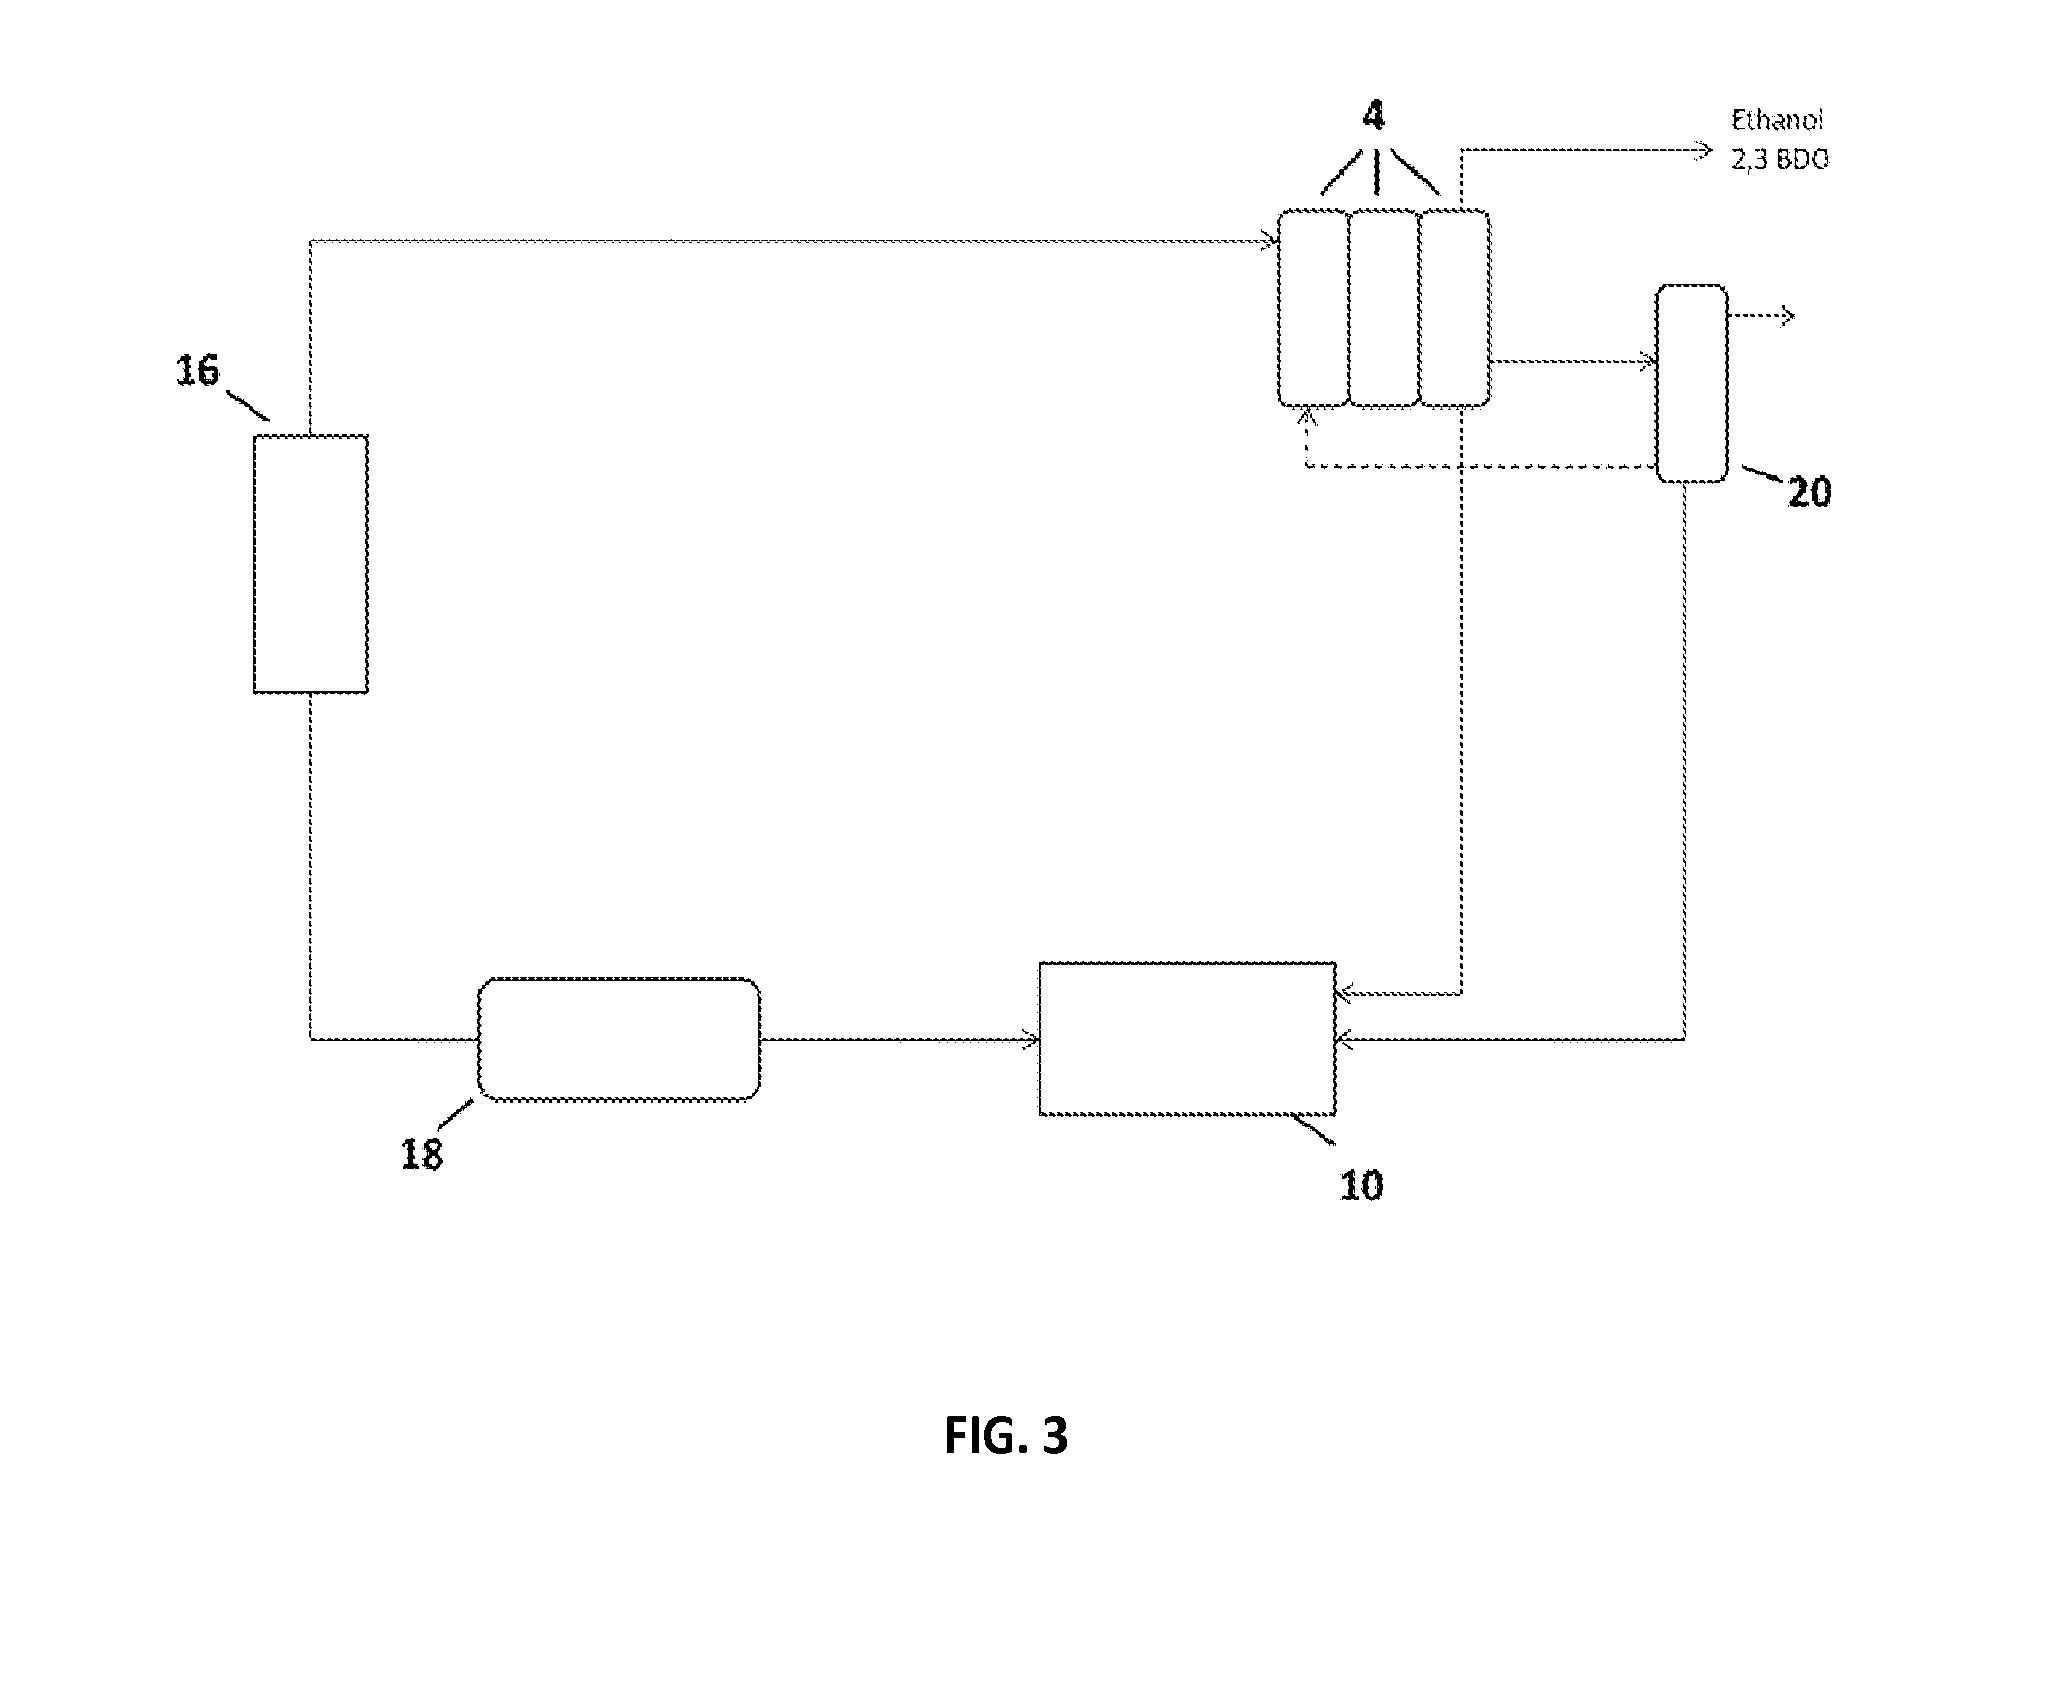 Methods and Systems for the Production of Hydrocarbon Products